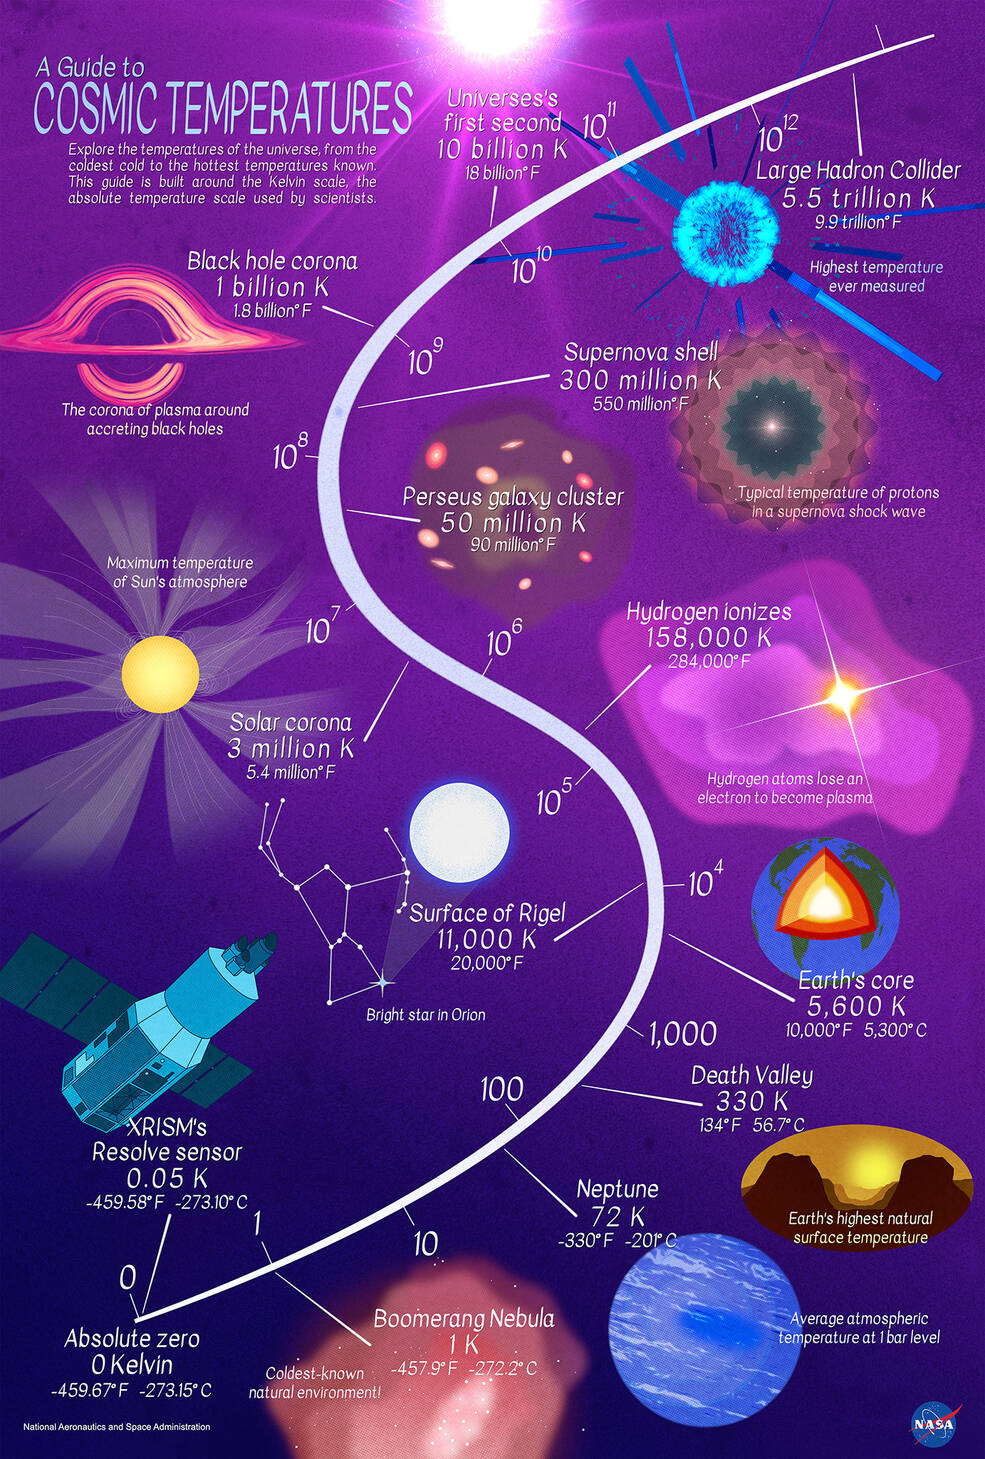 On a background ranging from dark blue (lower left) to bright purple, upper right), an S-shaped scales shows temperatures on the Kelvin scale in factors of 10. To its left and right, illustrations show cosmic examples in Fahrenheit and Celsius.